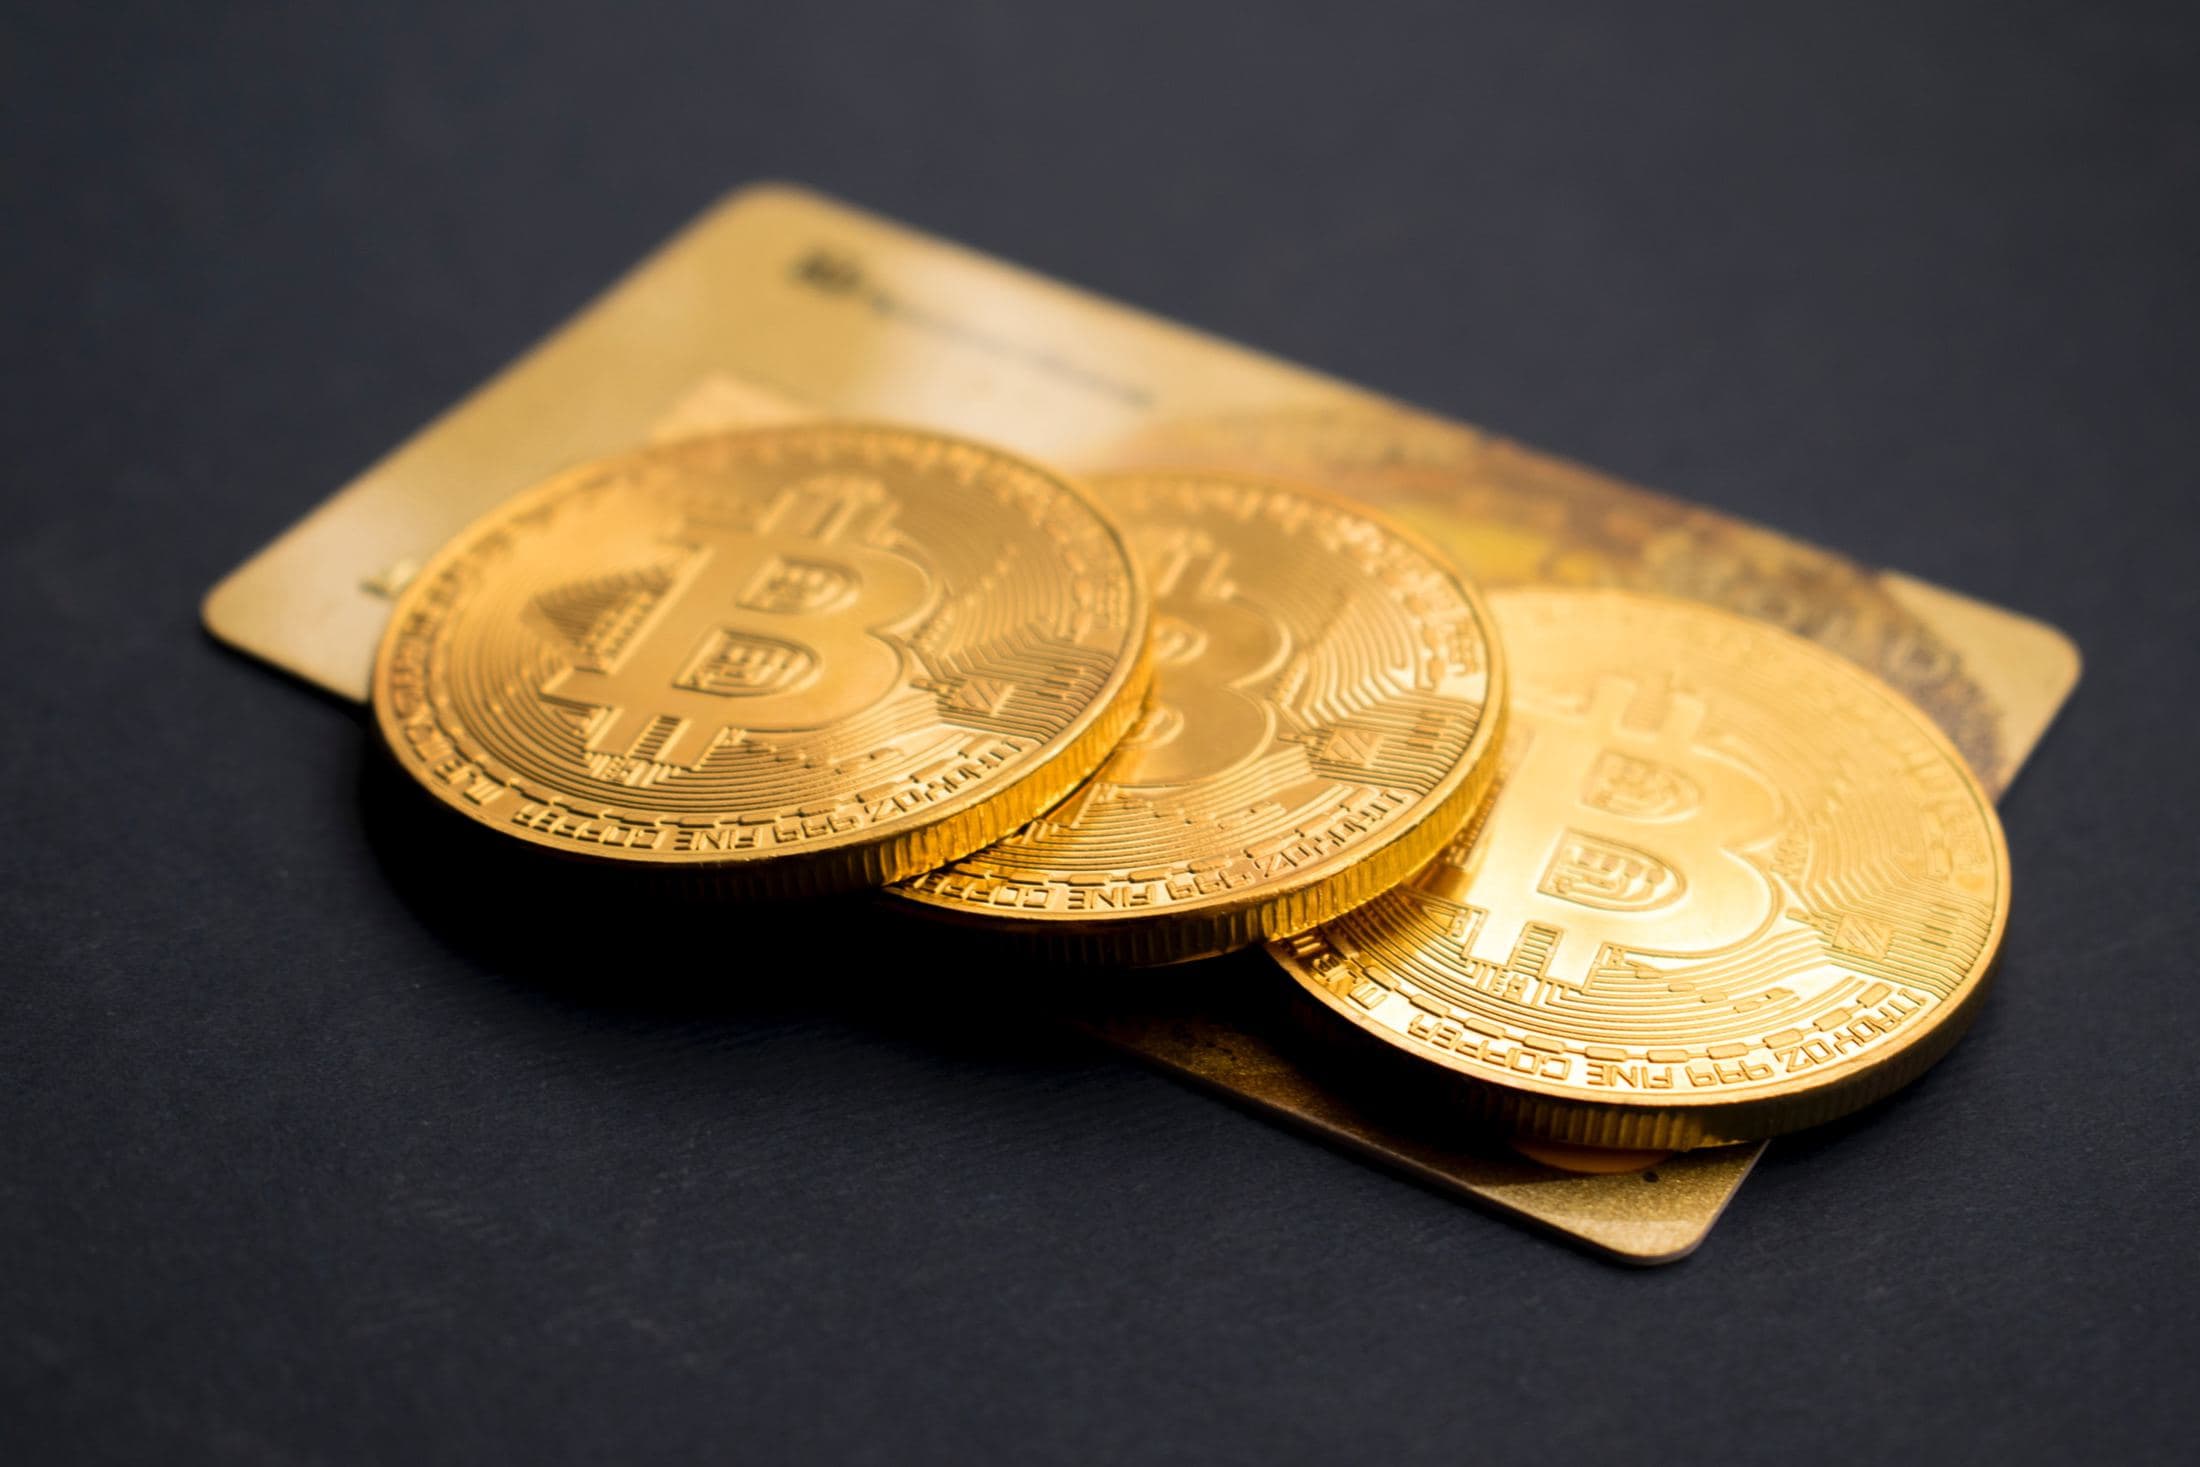 three round gold-colored bitcoin tokens